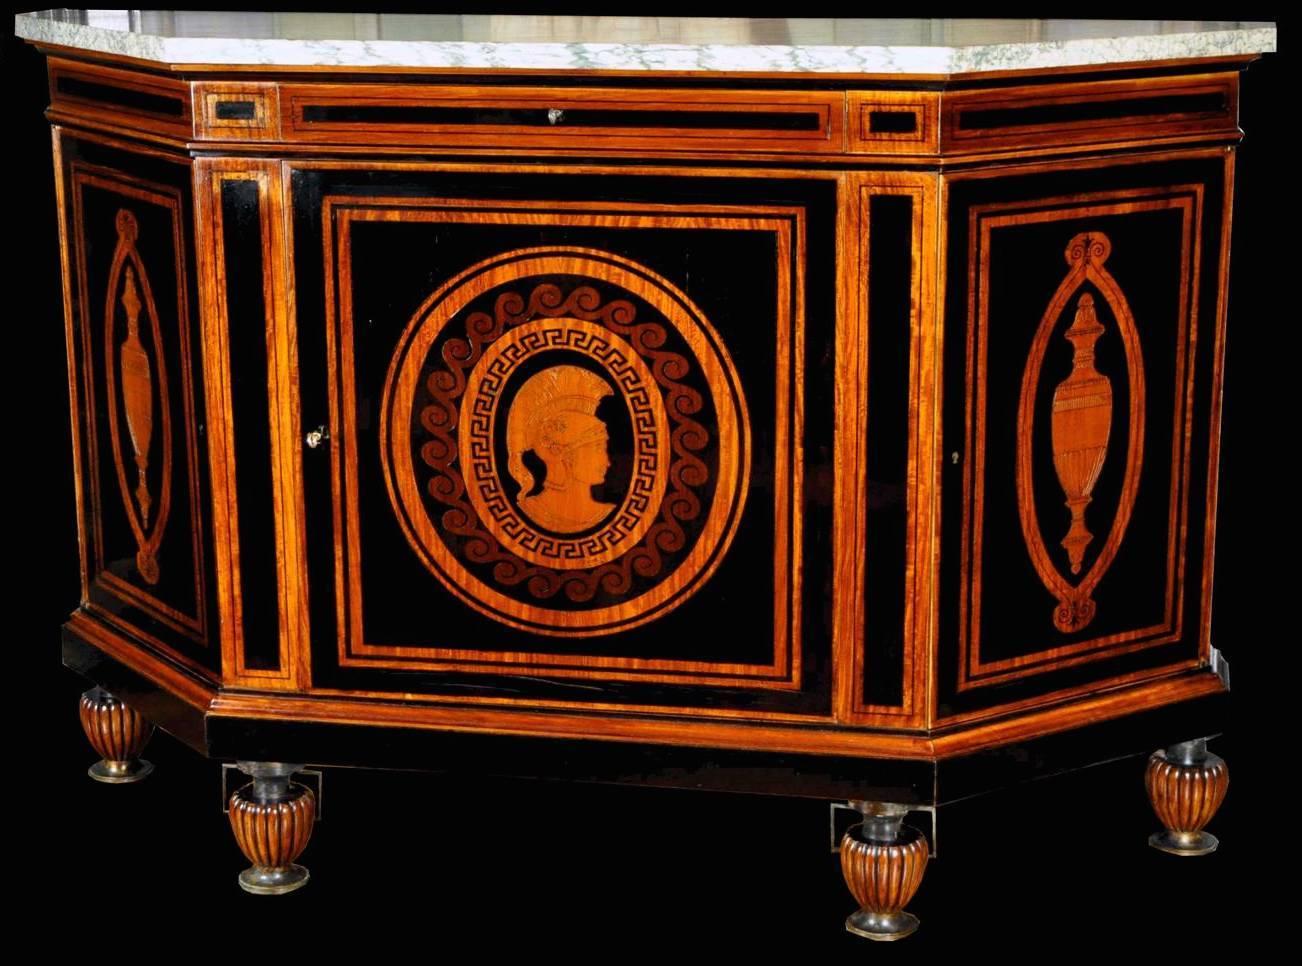 A curious French early 20th century sideboard signed E. Duru with three doors. White and green veined marble-top. Neo Greek vase form feet. Signed in center of the front door.
Measures: 114 x 149 x 48 cm.